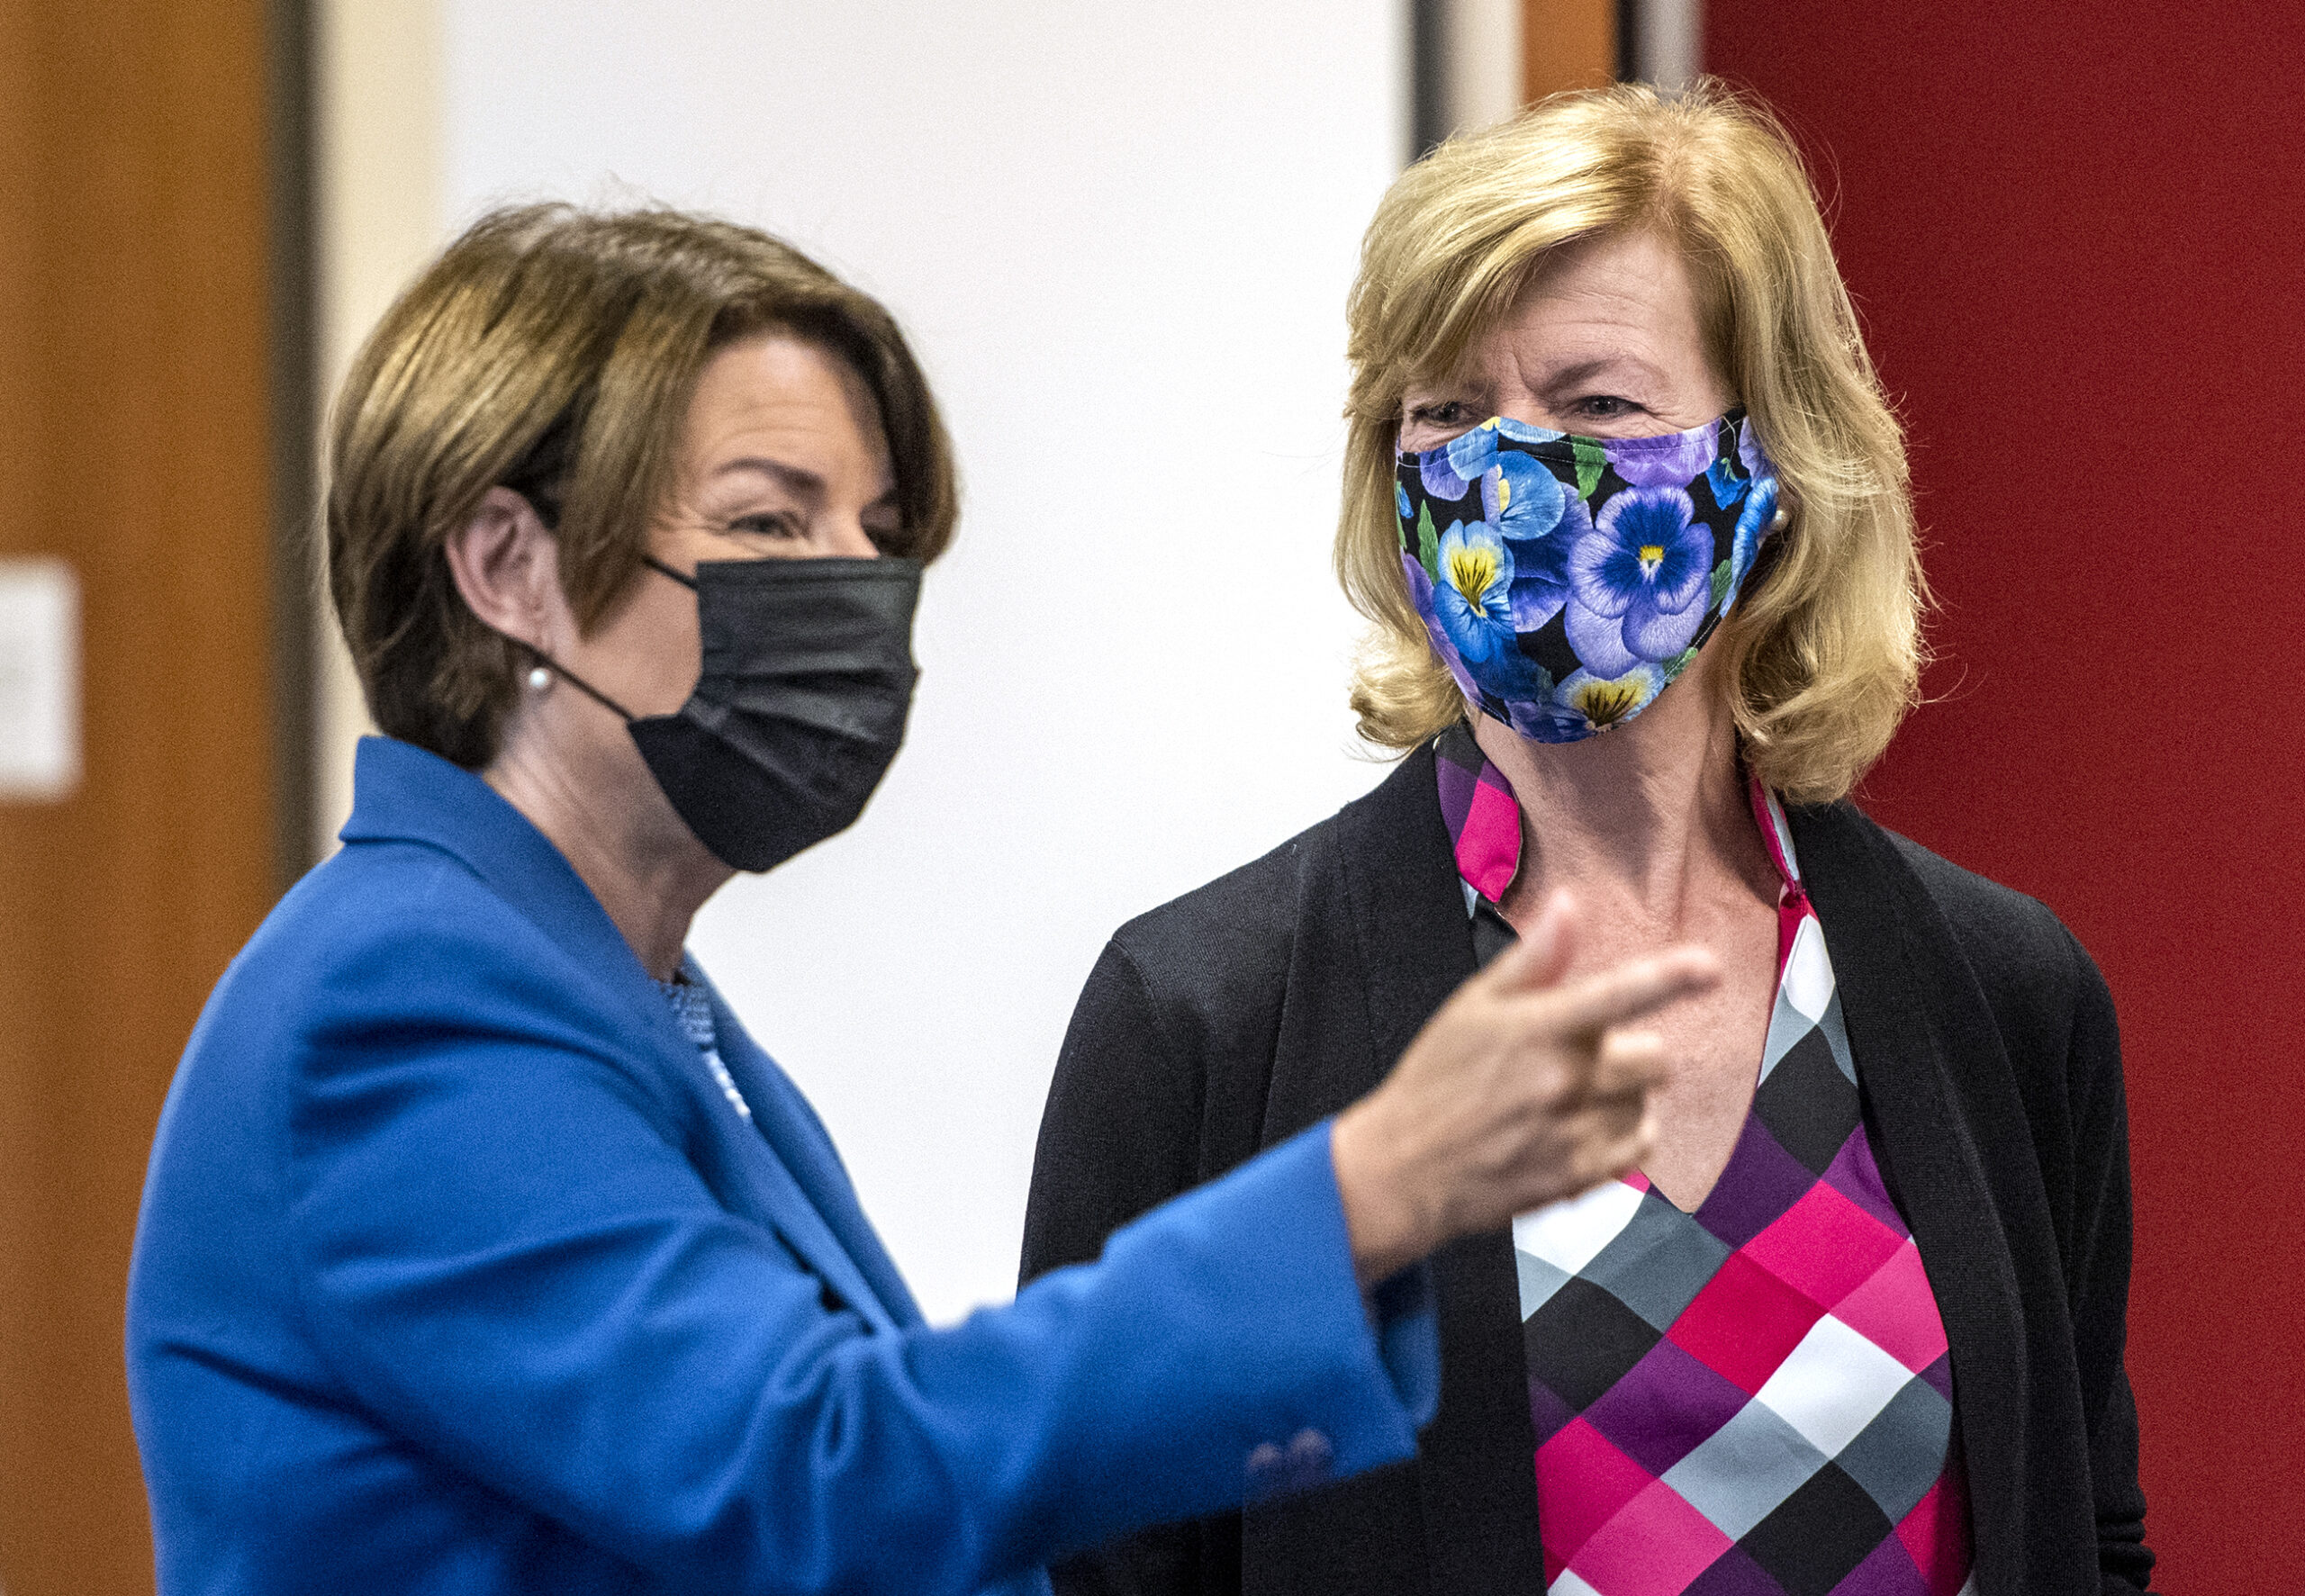 U.S. Senators Tammy Baldwin and Amy Klobuchar wear masks as they chat before the roundtable.